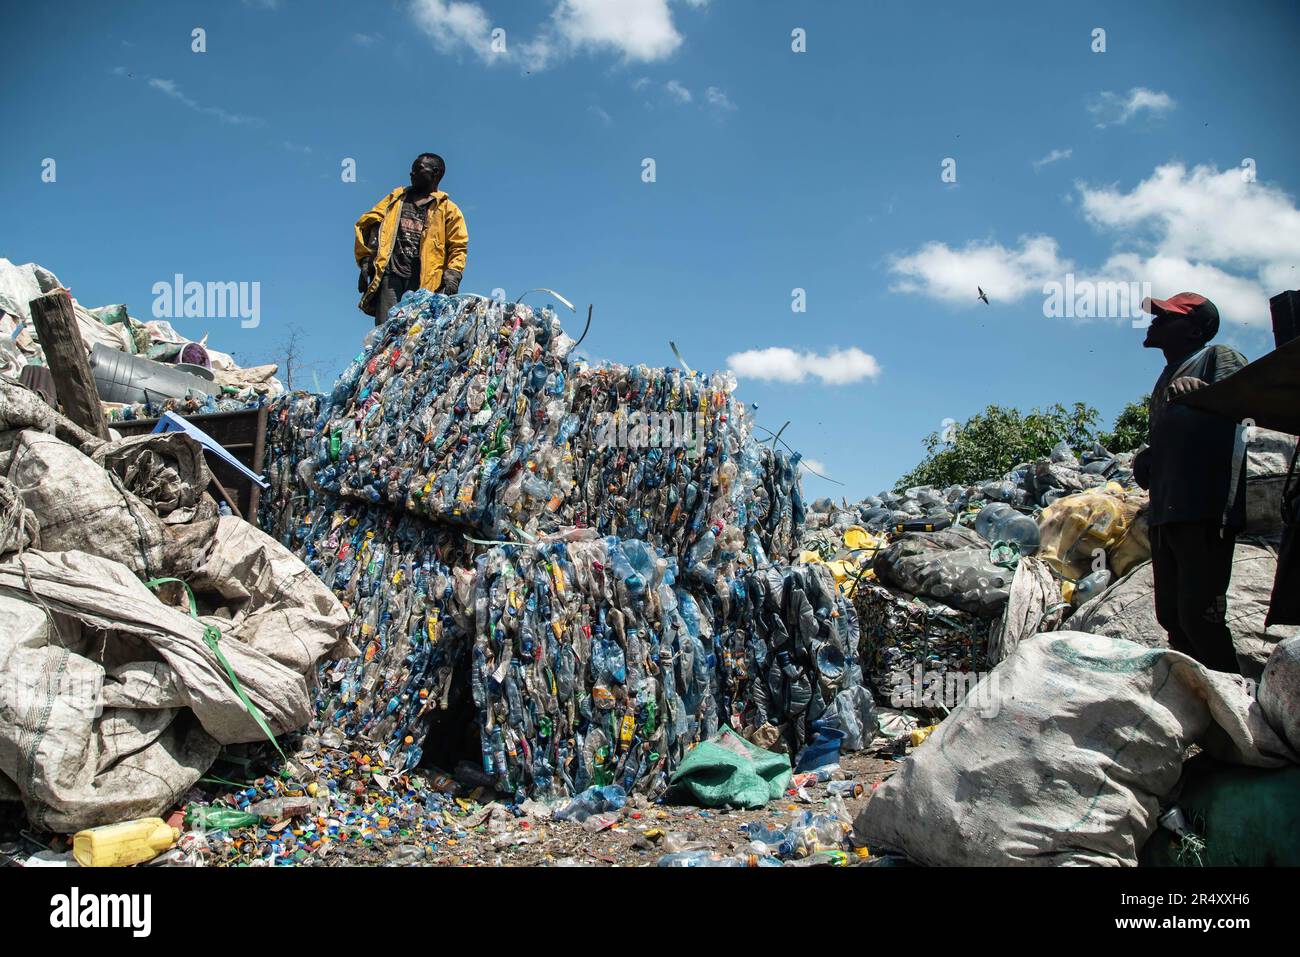 May 30, 2023, Nakuru, Kenya: A worker arranges bales of plastic at a recycling plant in Nakuru. Negotiators have gathered in Paris, France for the second round of deliberations to develop a global treaty aimed at tackling the escalating issue of plastic pollution. According to a recent report by the United Nations Environment Programme (UNEP), countries have the potential to reduce plastic pollution by 80% by 2040 by eliminating unnecessary plastics, implementing recycling and reuse strategies, introducing deposit return schemes, and substituting plastic with sustainable alternative materials. Stock Photo